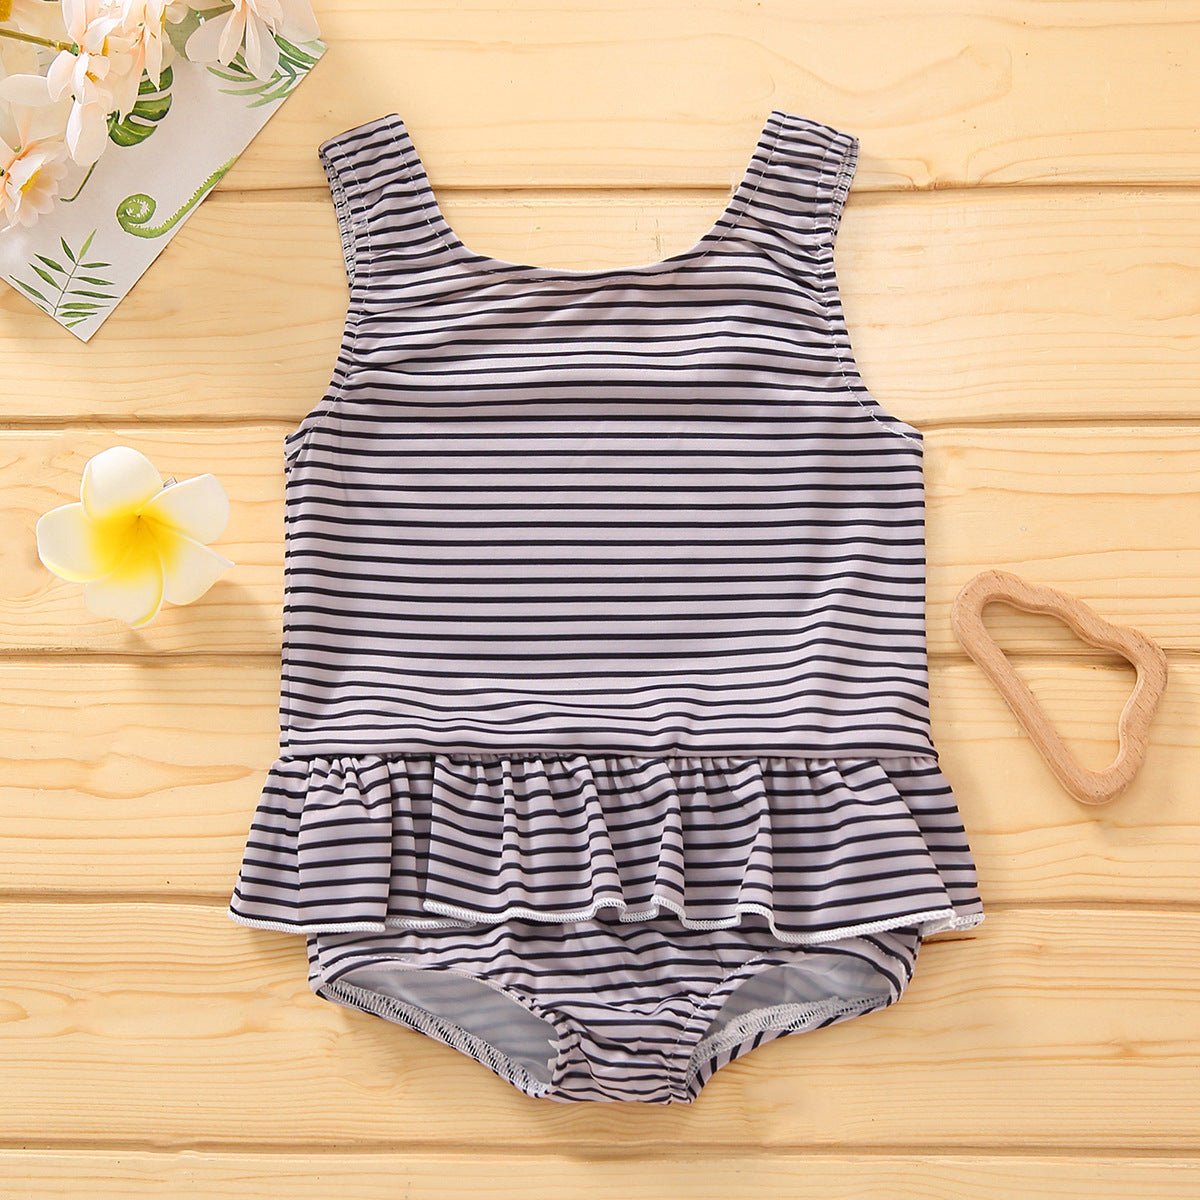 Summer universal casual spot thin pullover summer sleeveless non-hood skin color clothing swimsuit